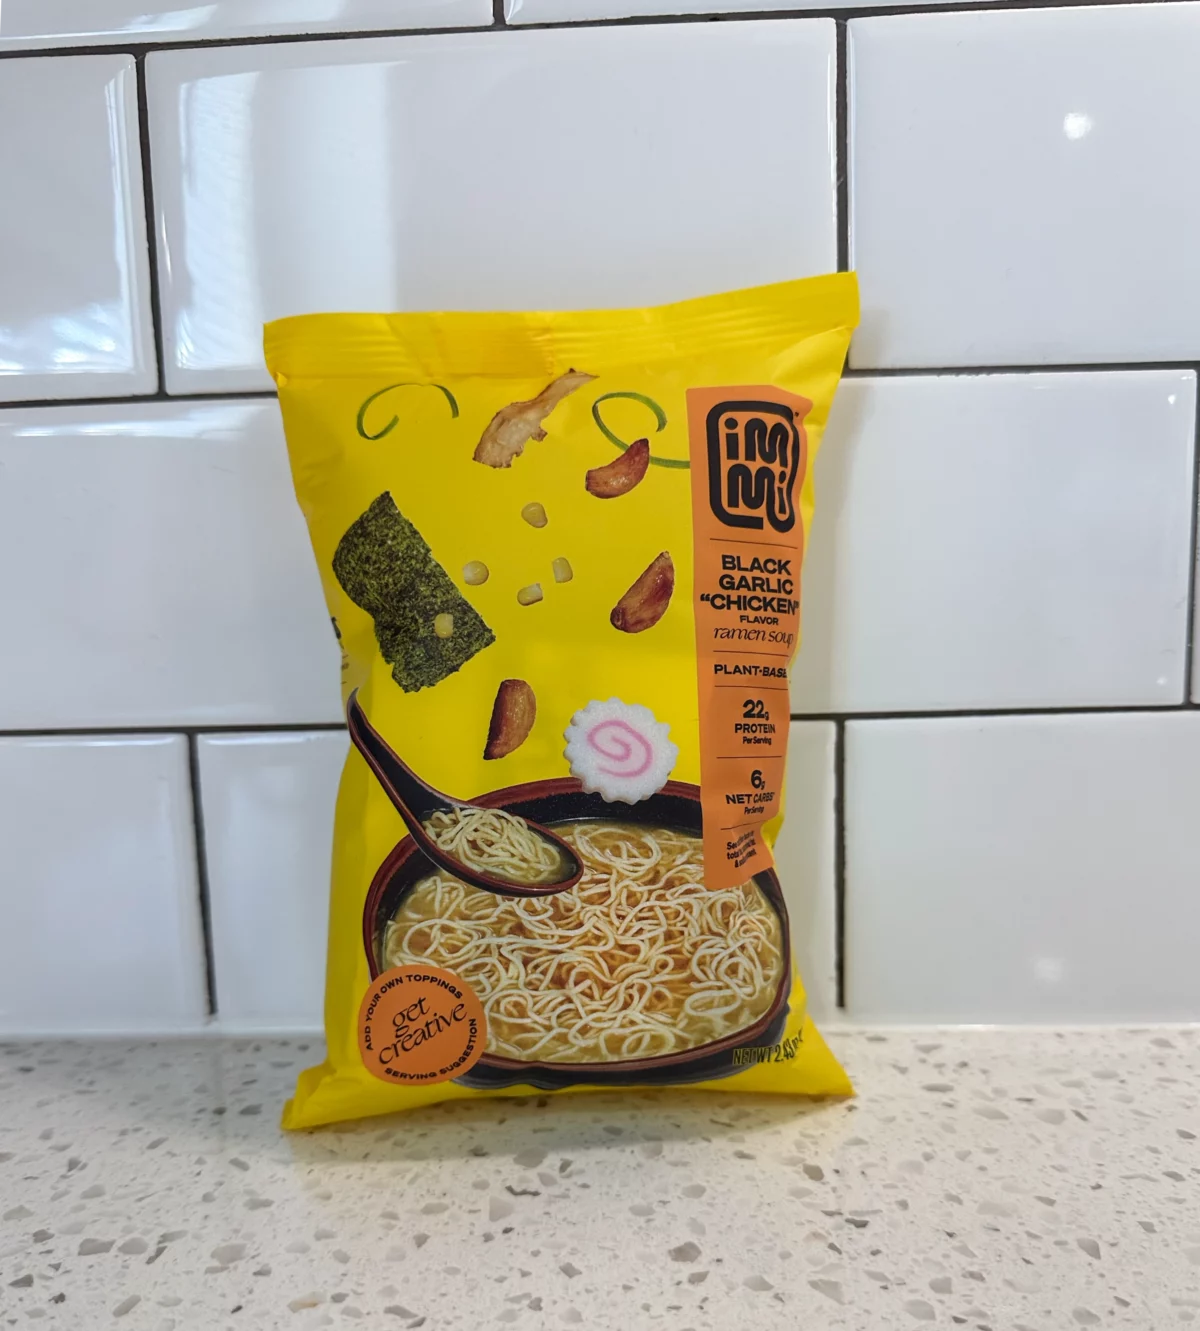 immi Ramen Review: A Low-Carb, High-Protein, Keto-Friendly and Plant-Based Instant Ramen 1